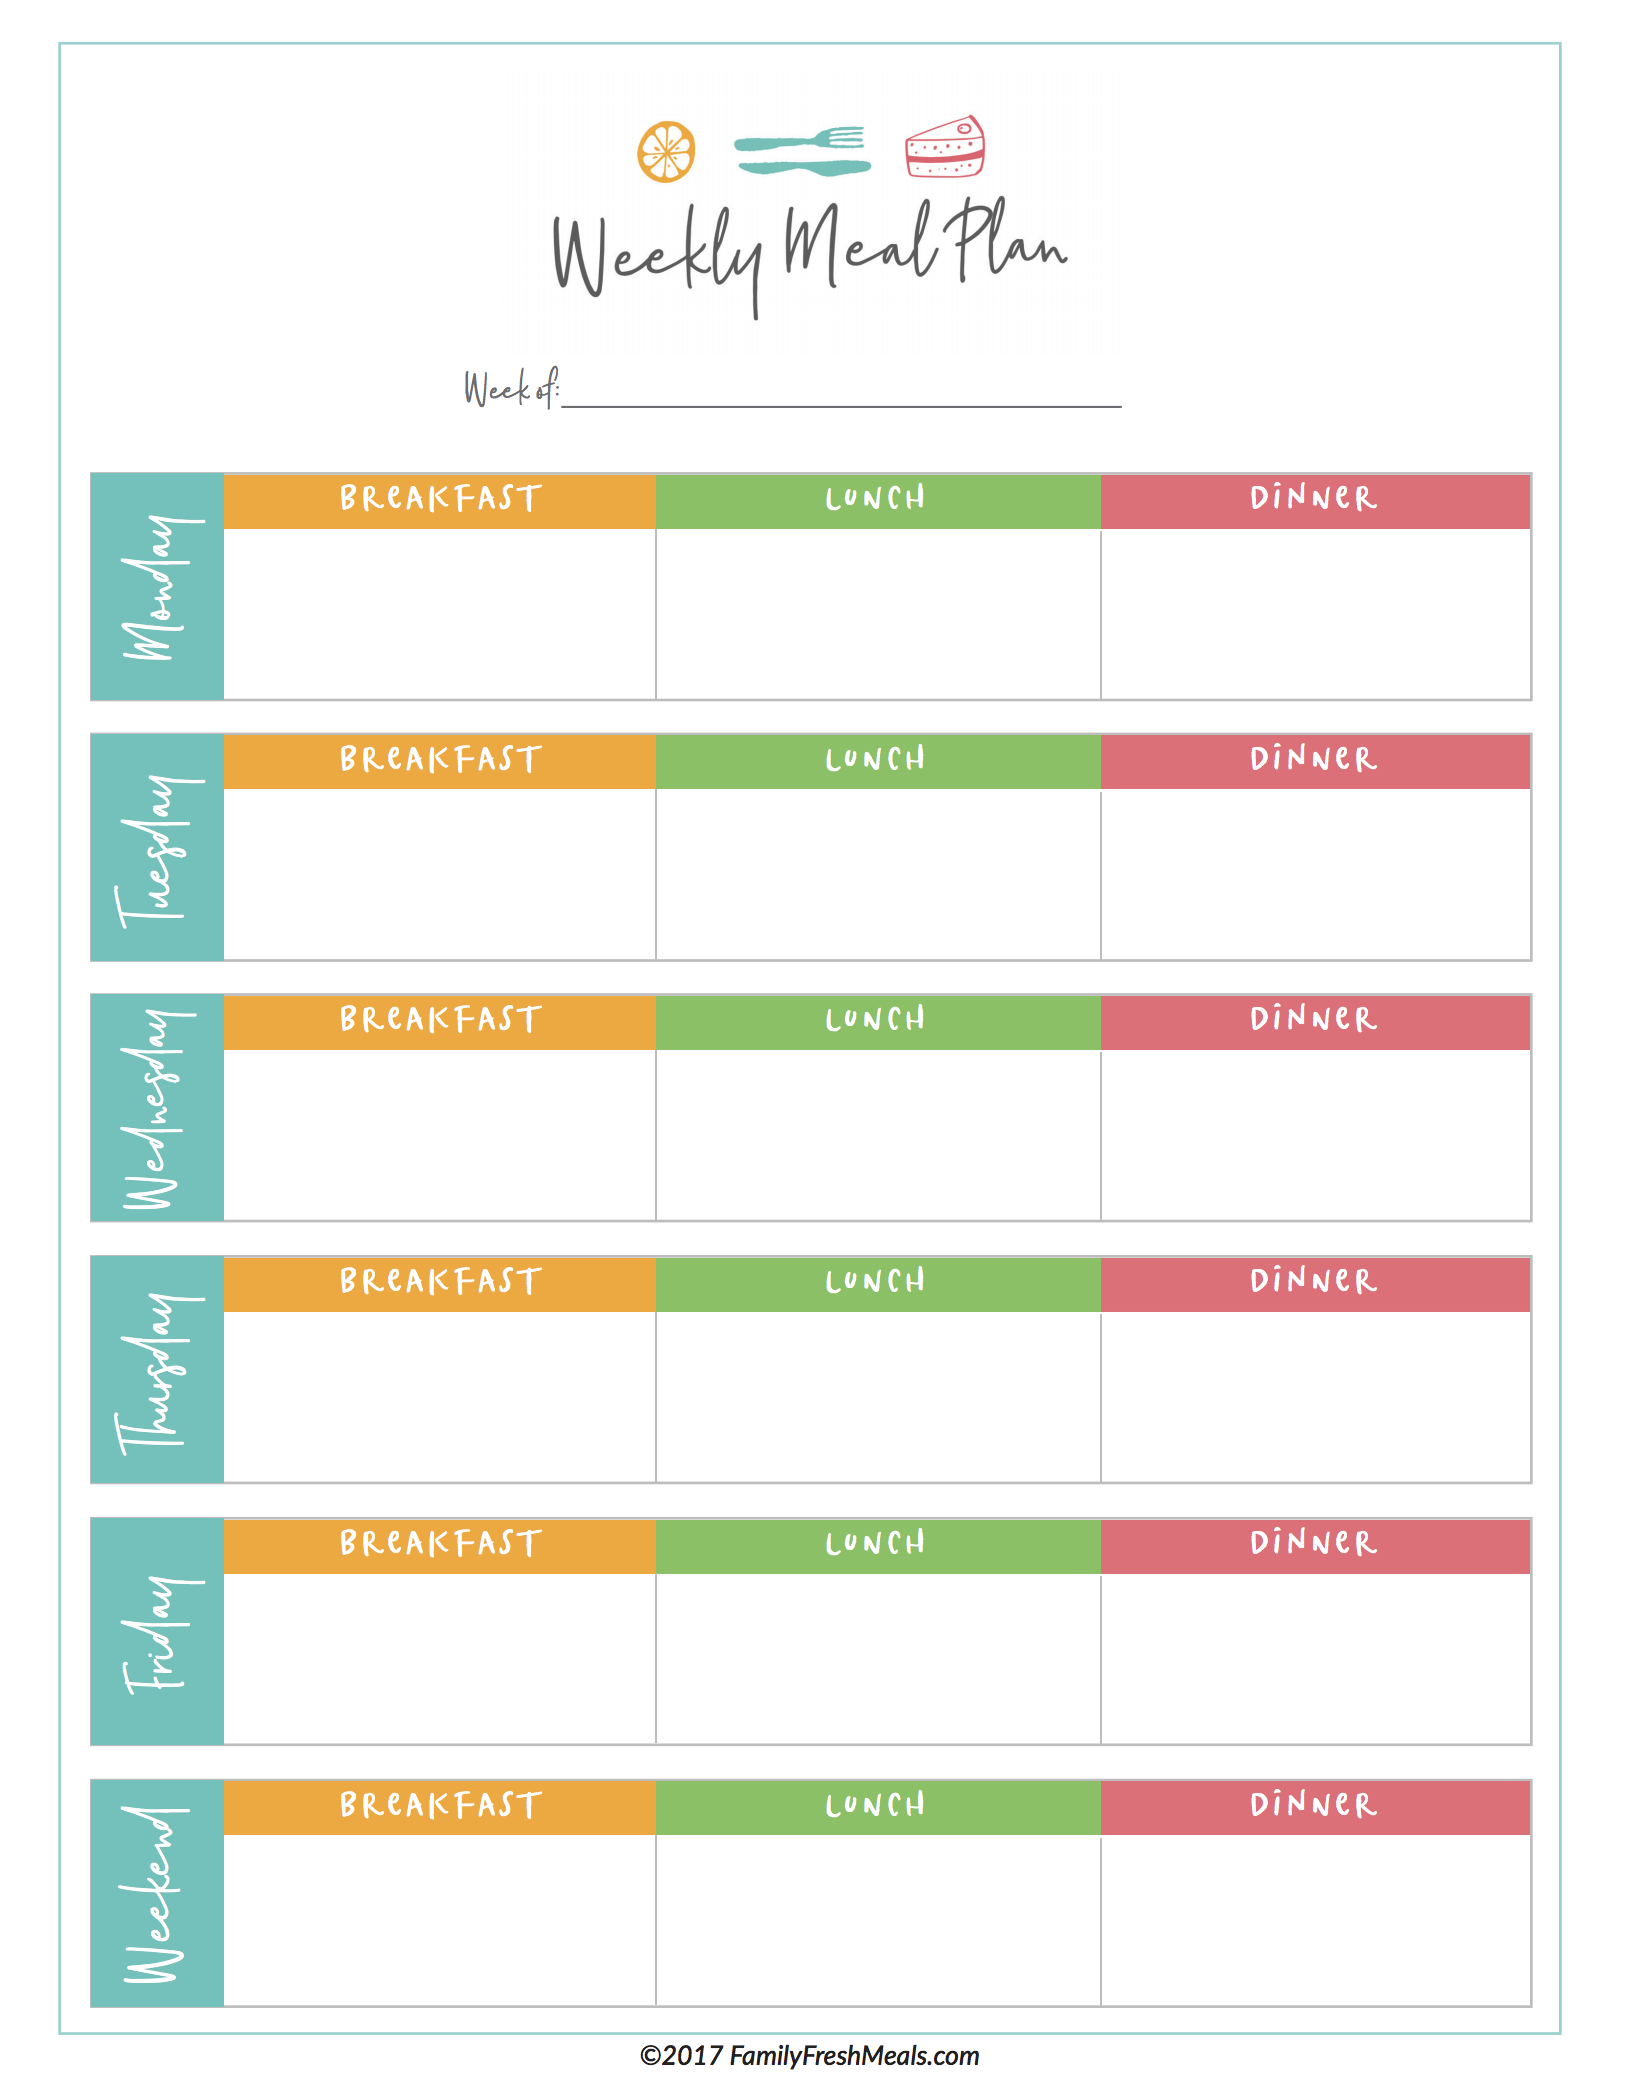 monthly-and-weekly-free-printable-meal-planner-printable-crush